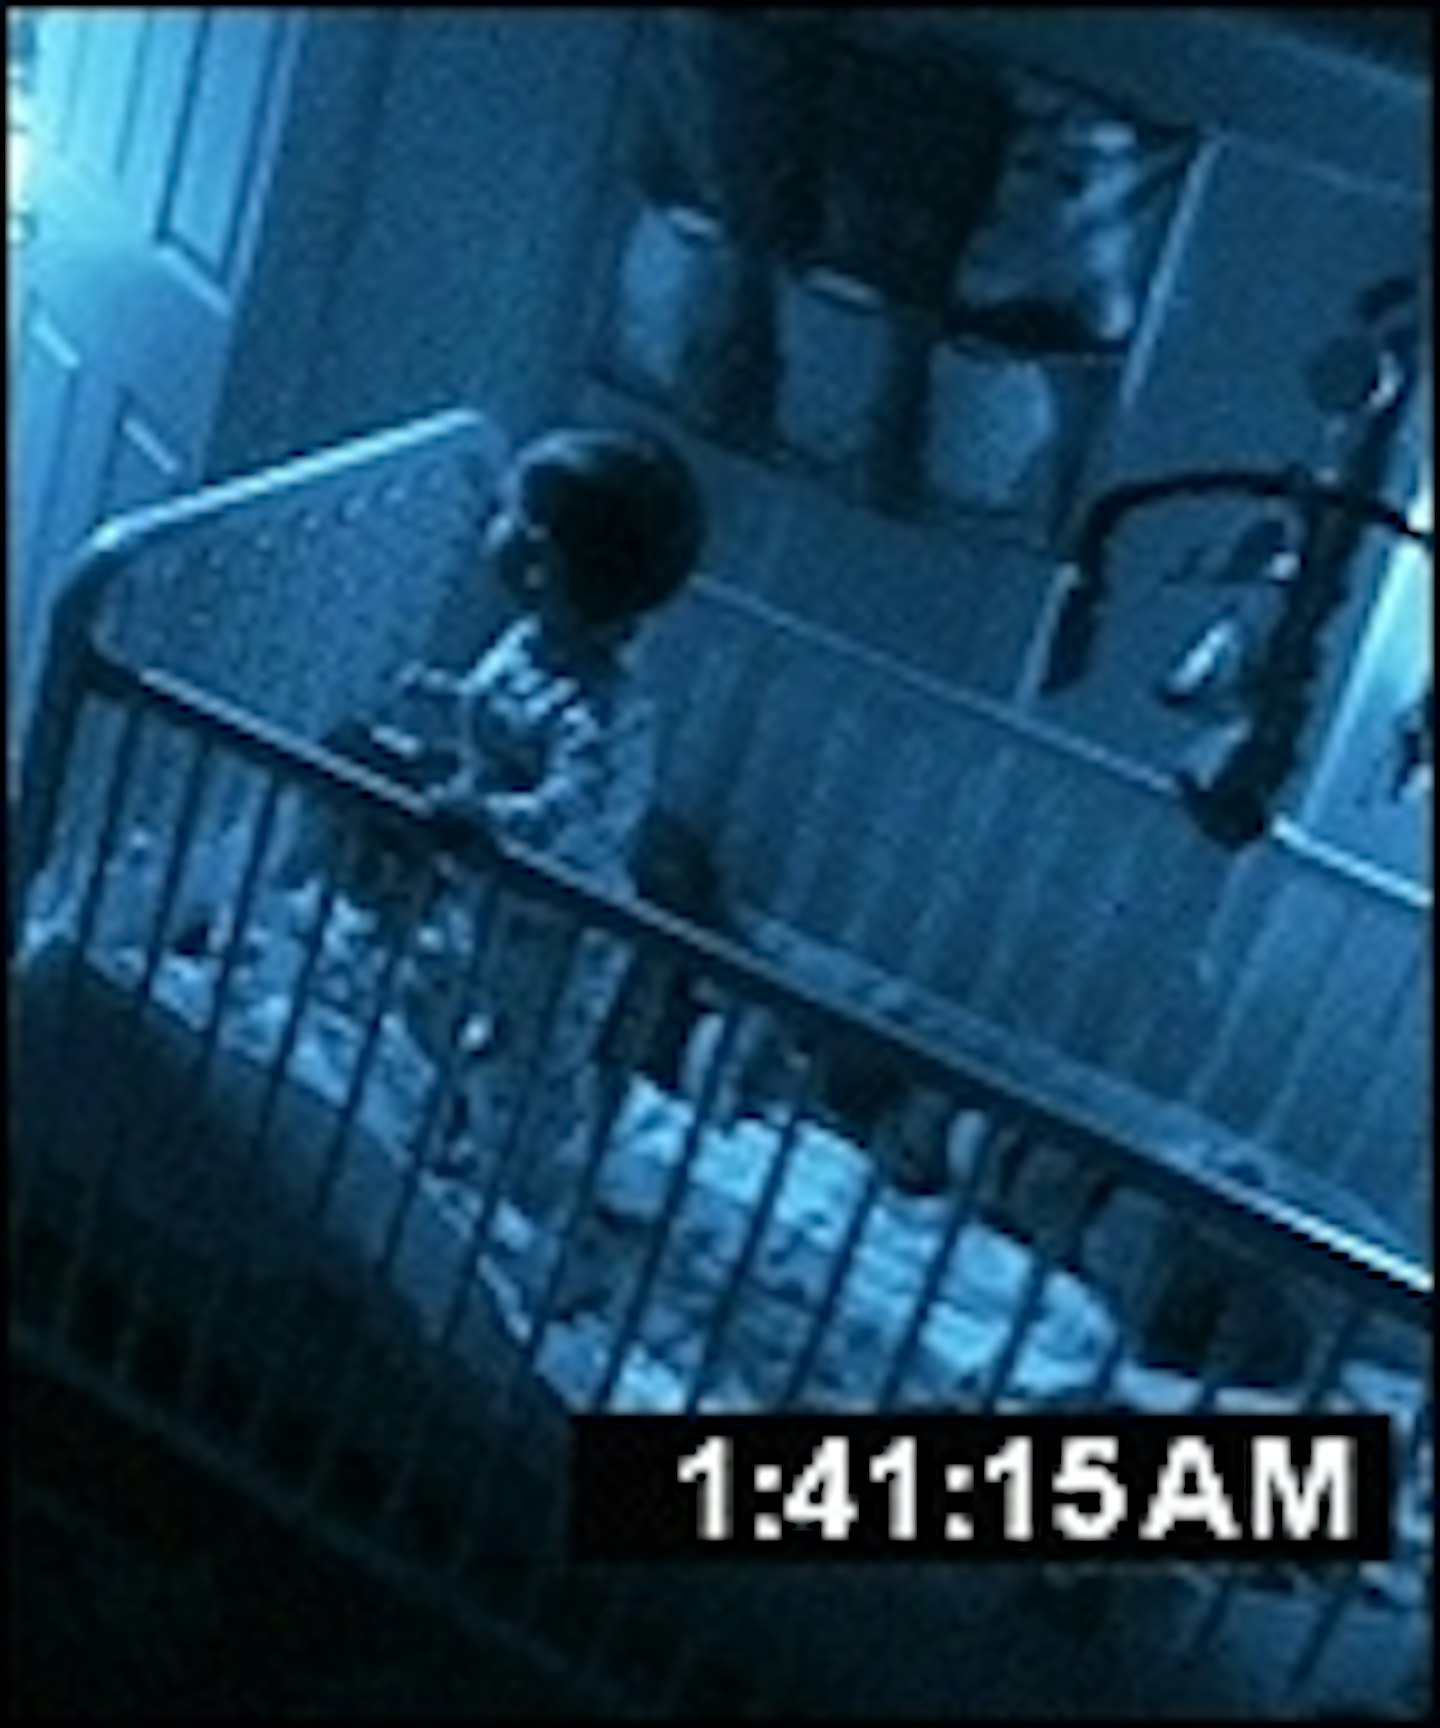 Paranormal Activity 3 Scares Up A Date